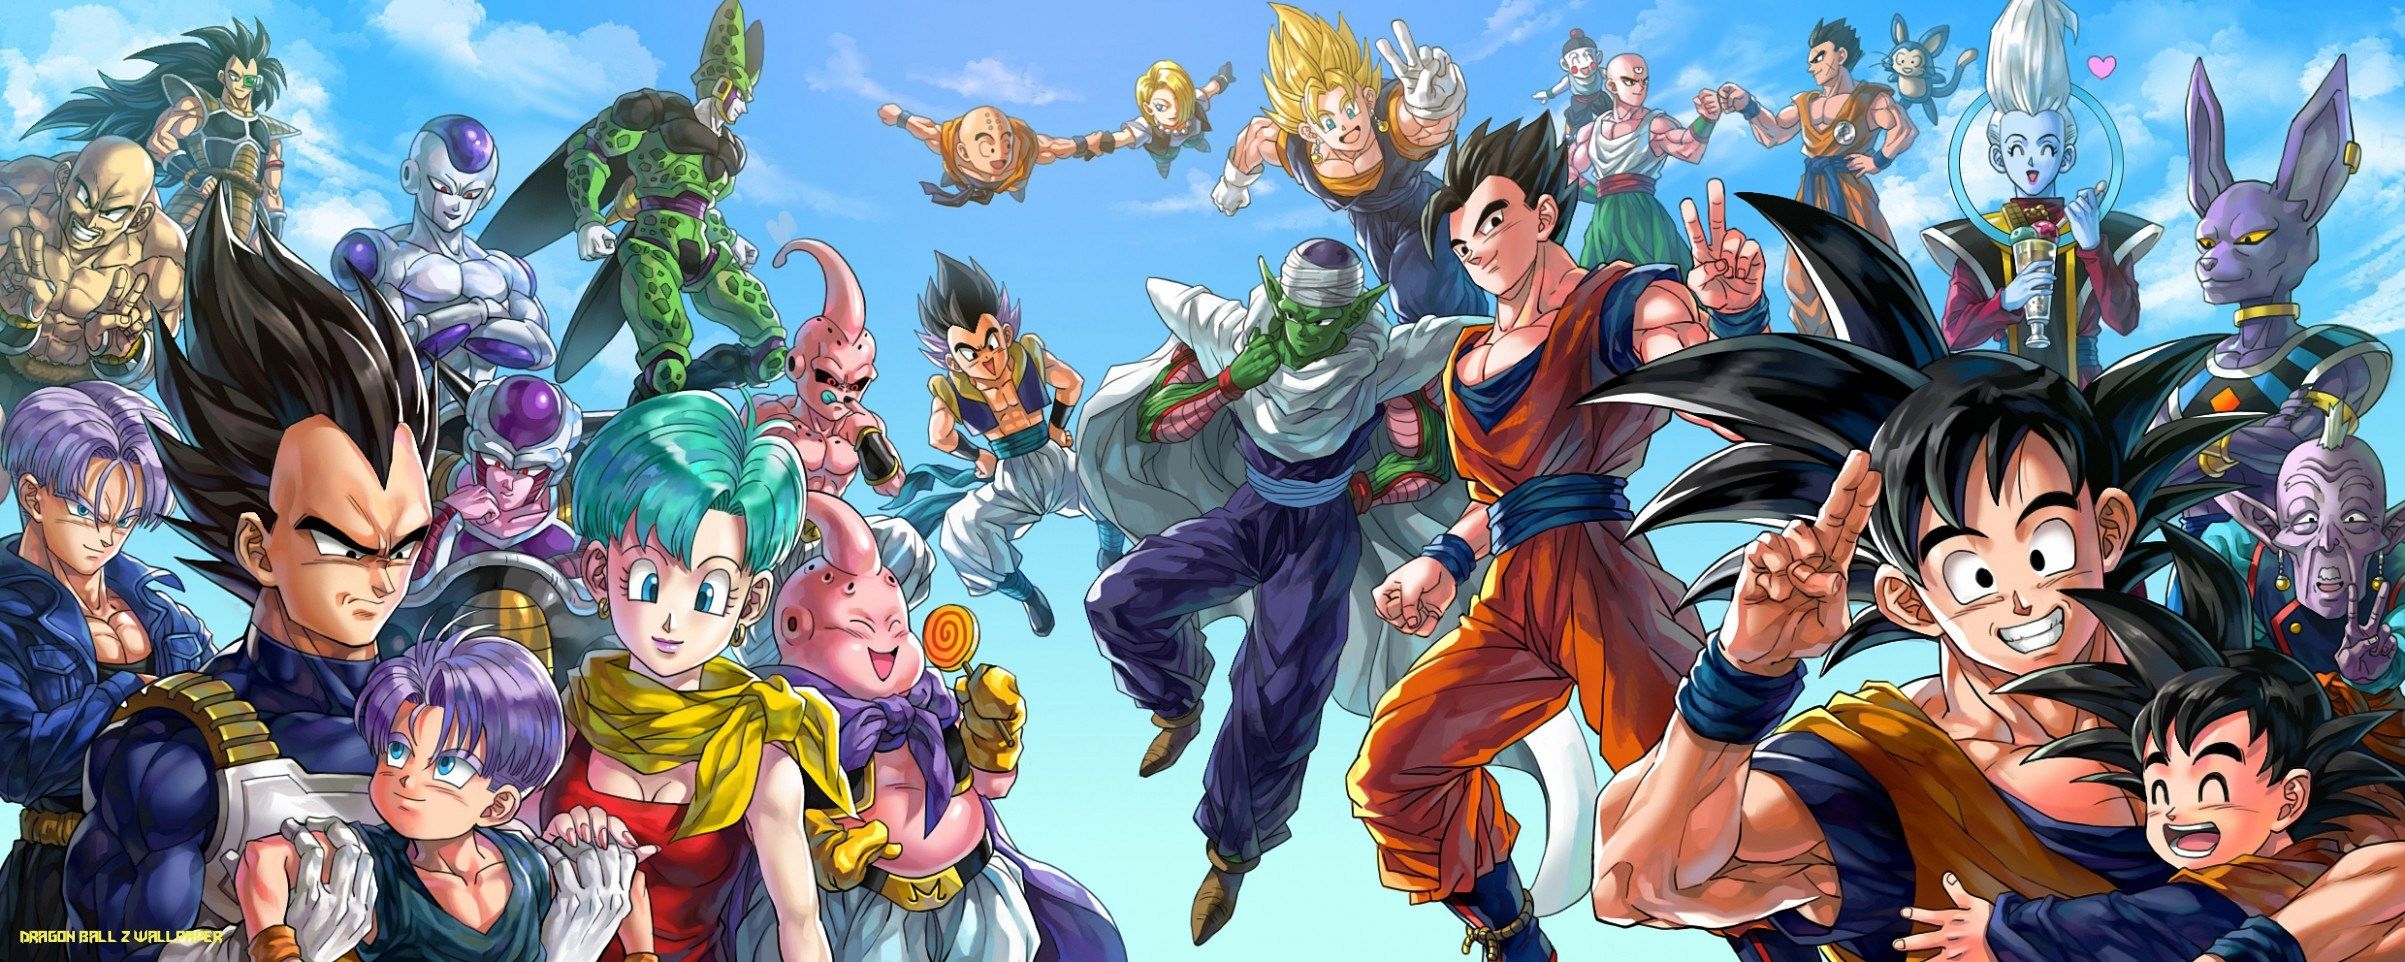 Simple Guidance For You In Dragon Ball Z Wallpaper. dragon ball z